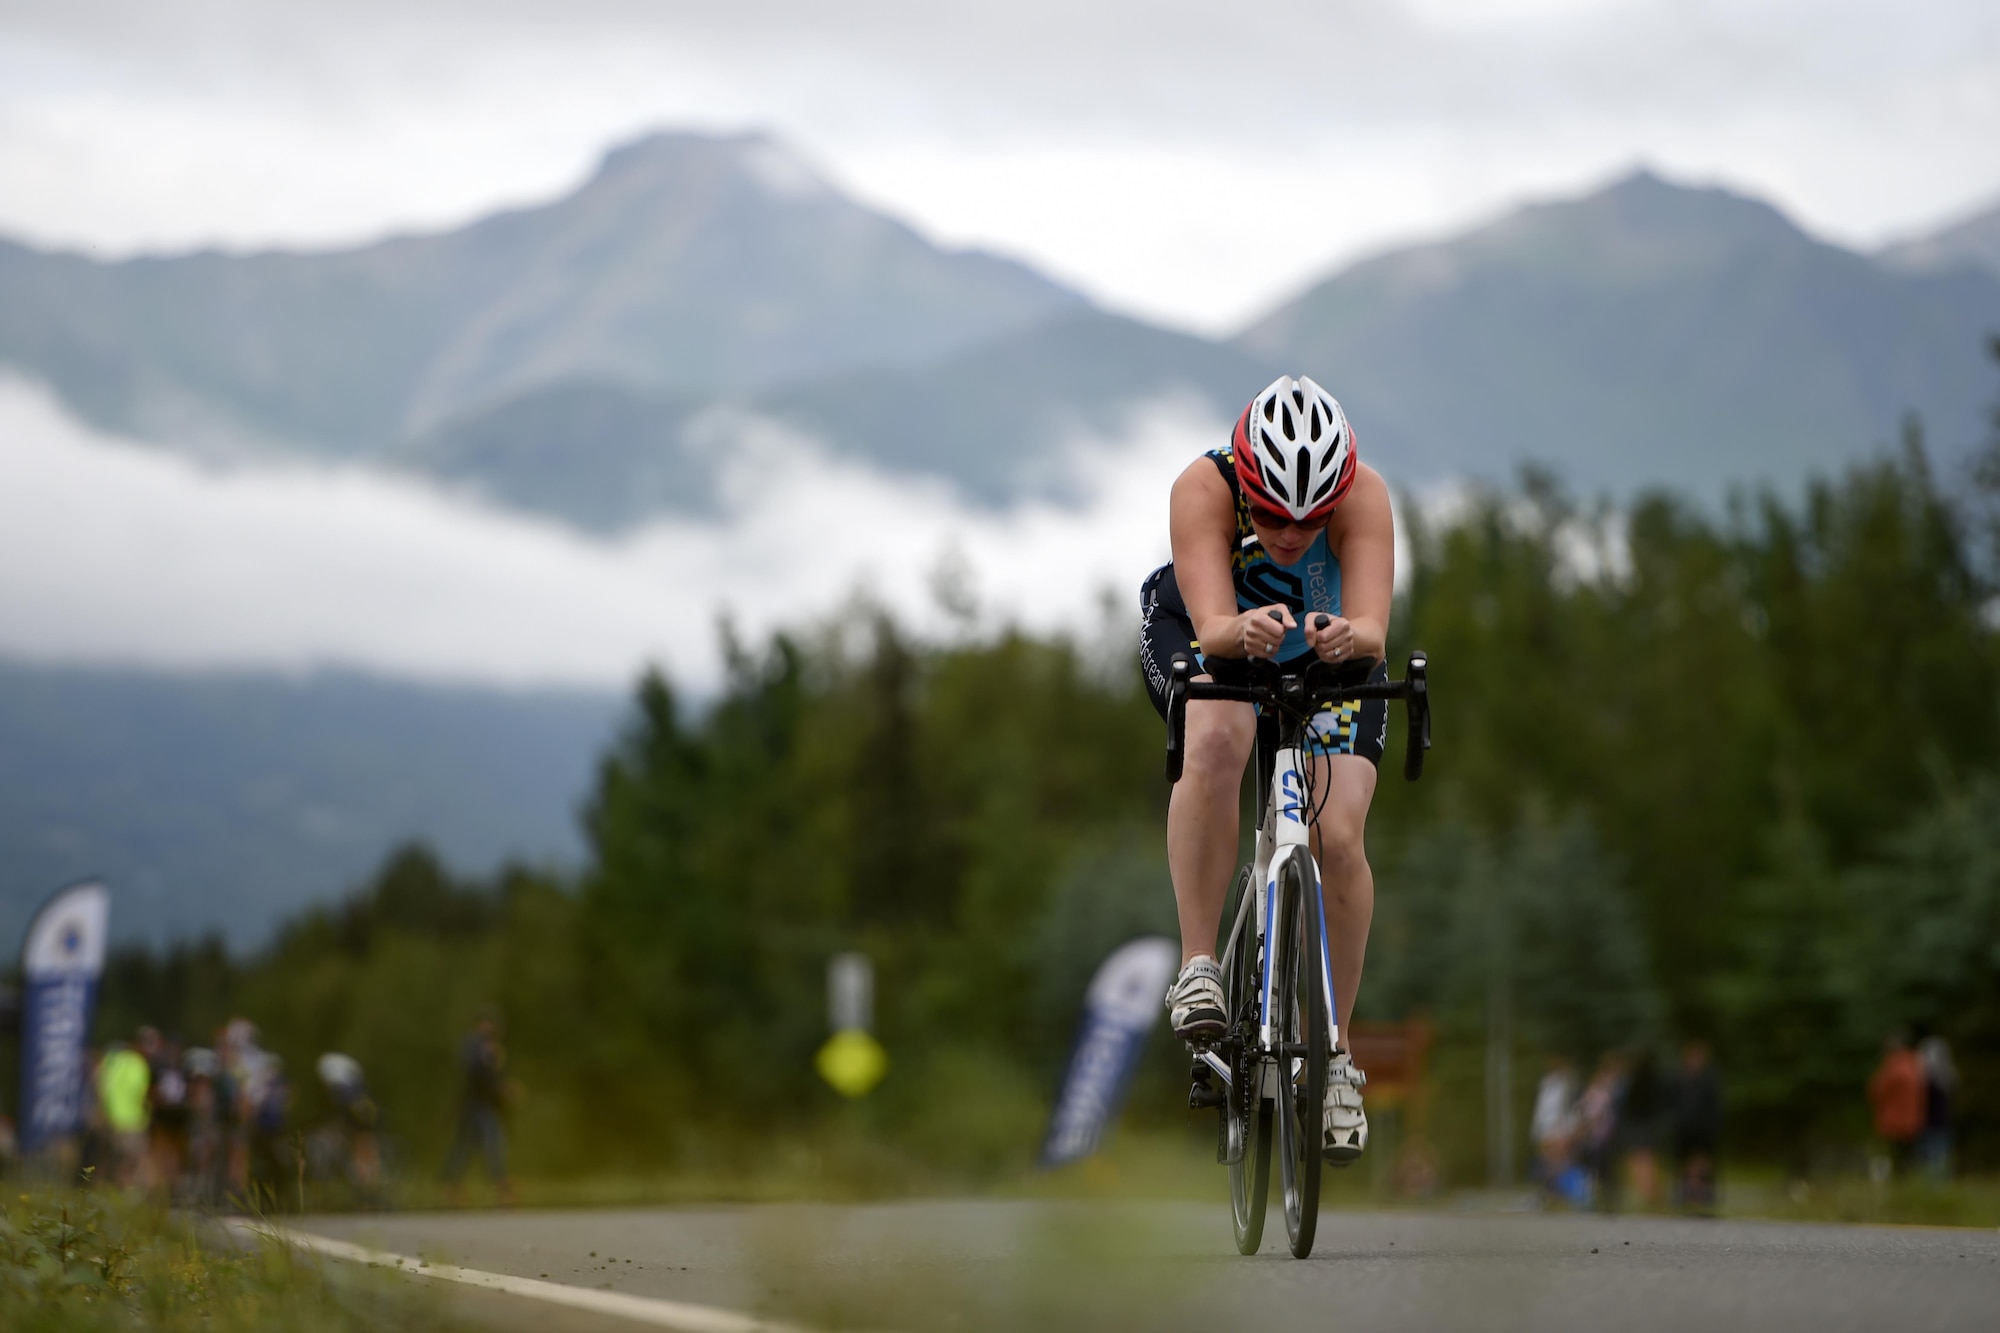 A cyclist takes off from the starting line at Moose Run Golf Course at Joint Base Elmendorf-Richardson, Alaska, Aug. 3, 2017. For more than 15 years, the club has hosted road race events at JBER.